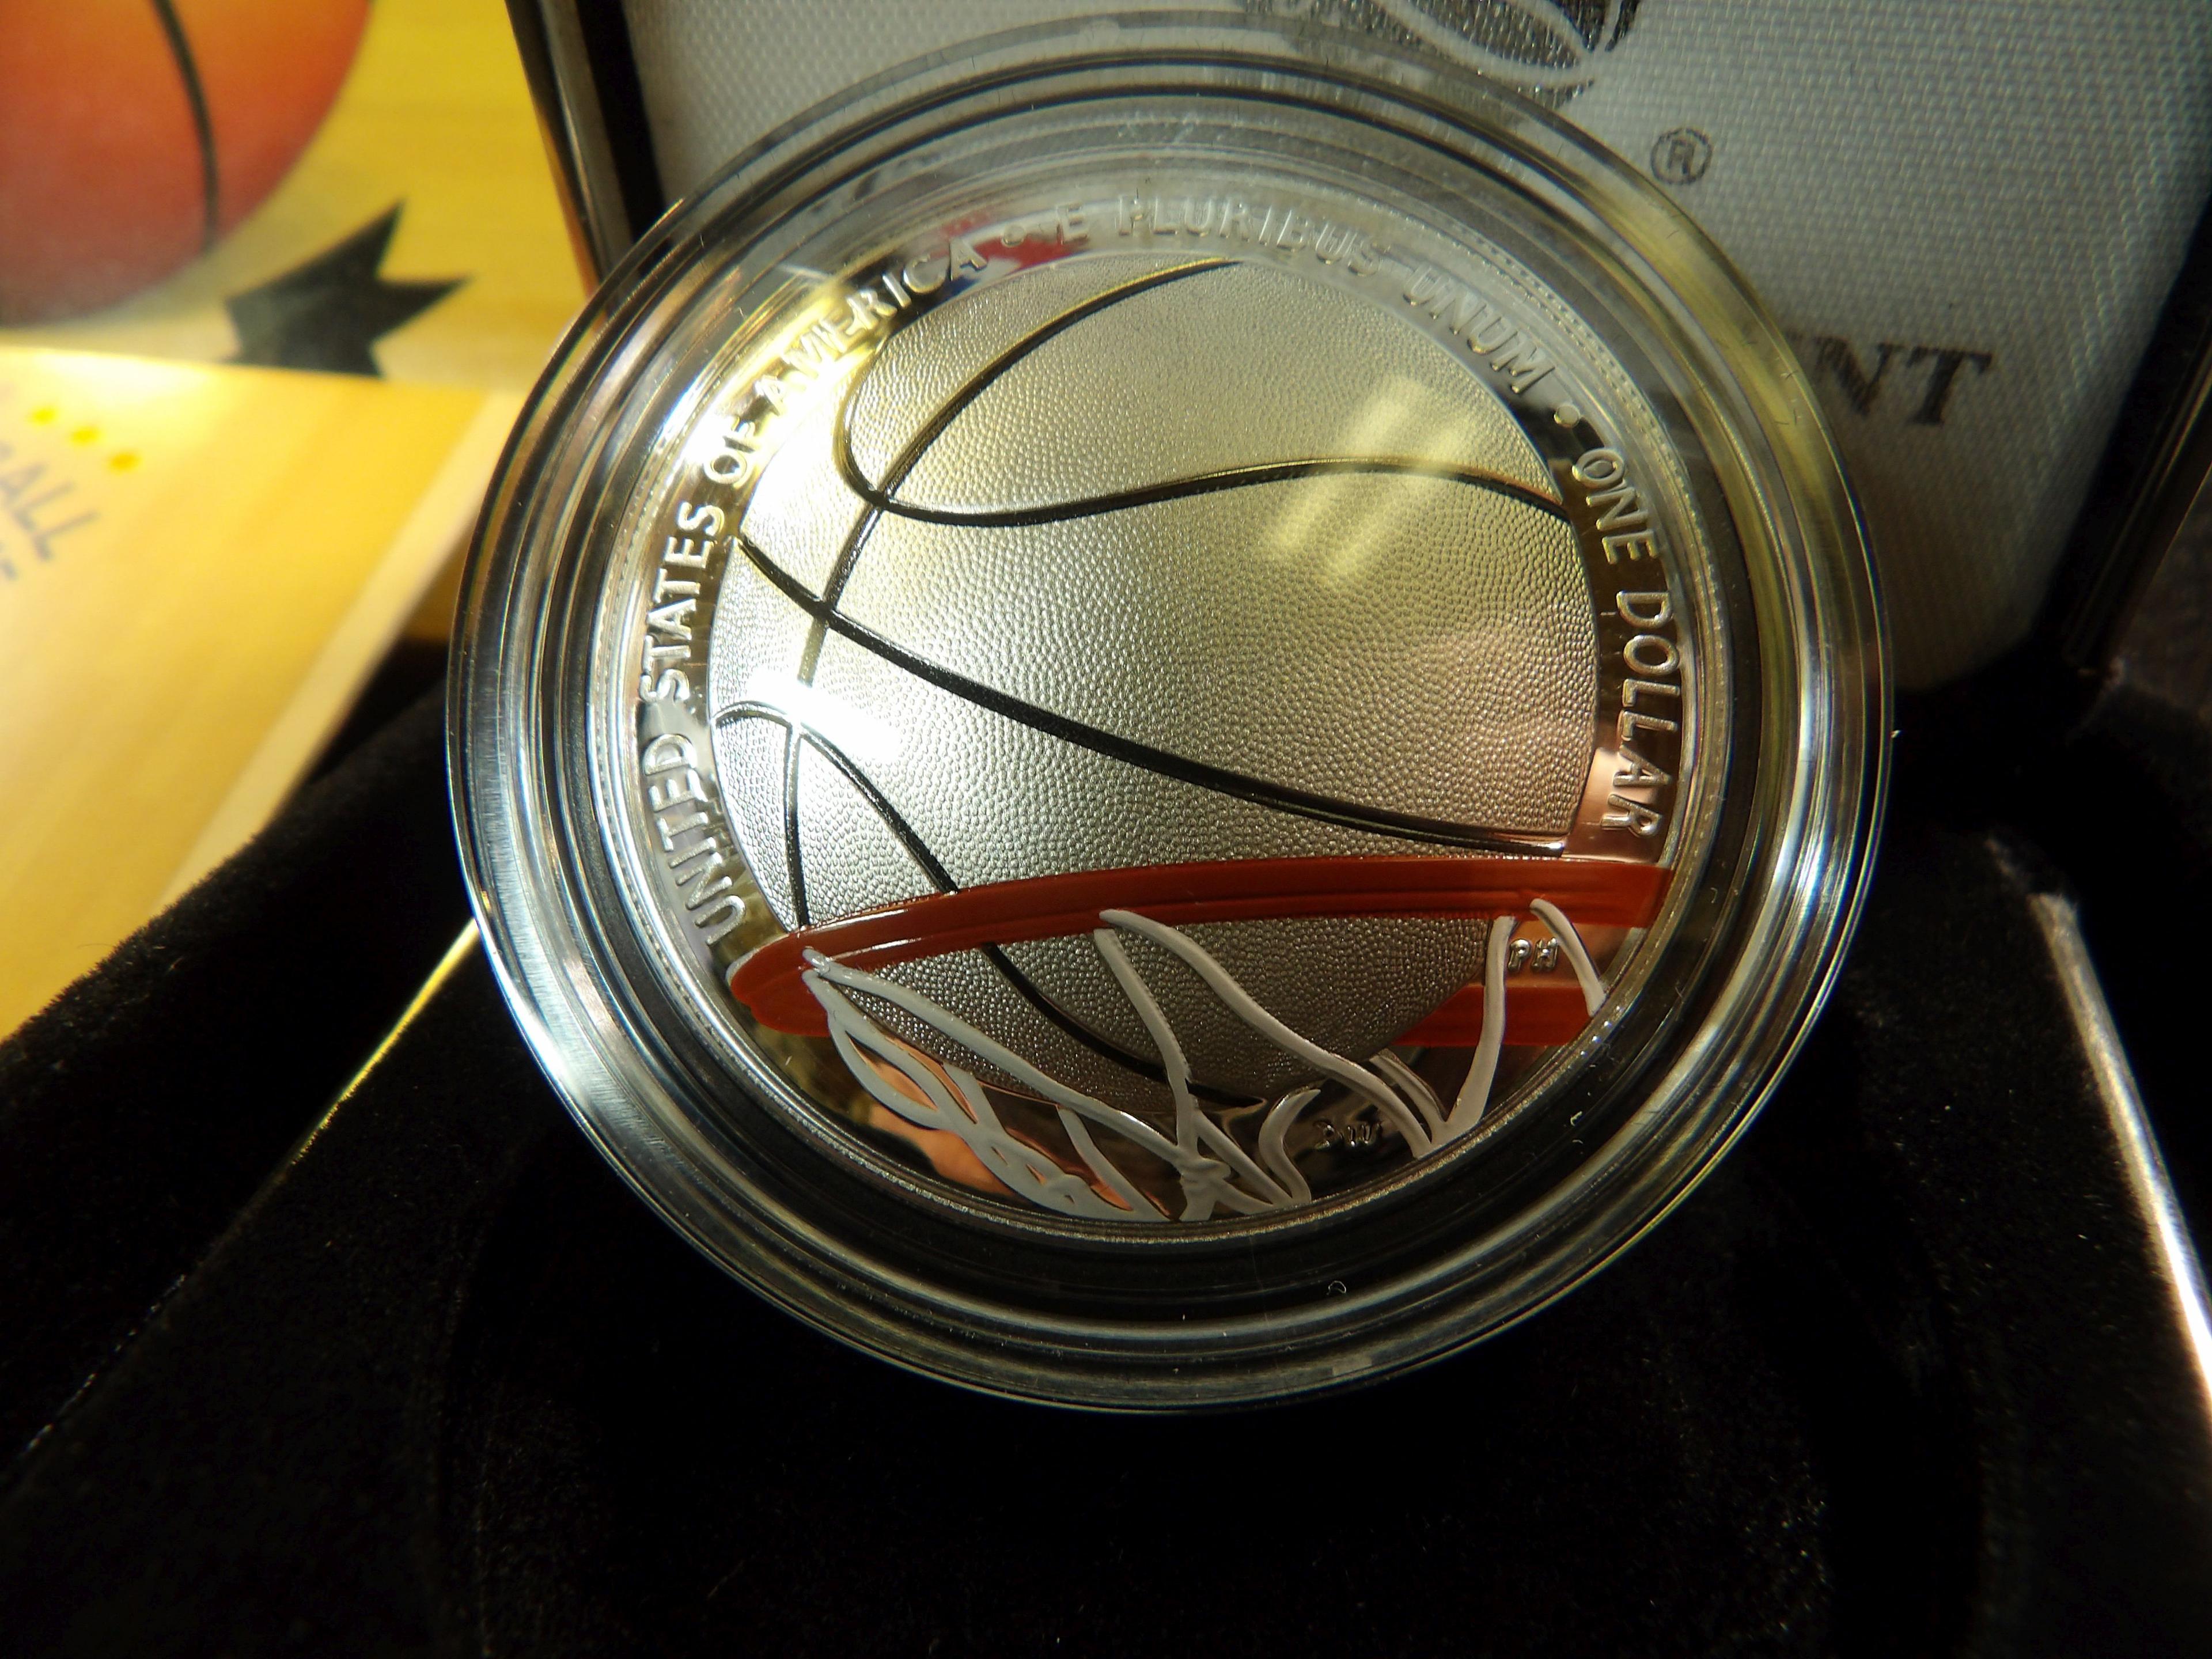 2020 S Basketball Hall of Fame Proof Commemorative Silver Dollar in original U.S. Mint box of issue.